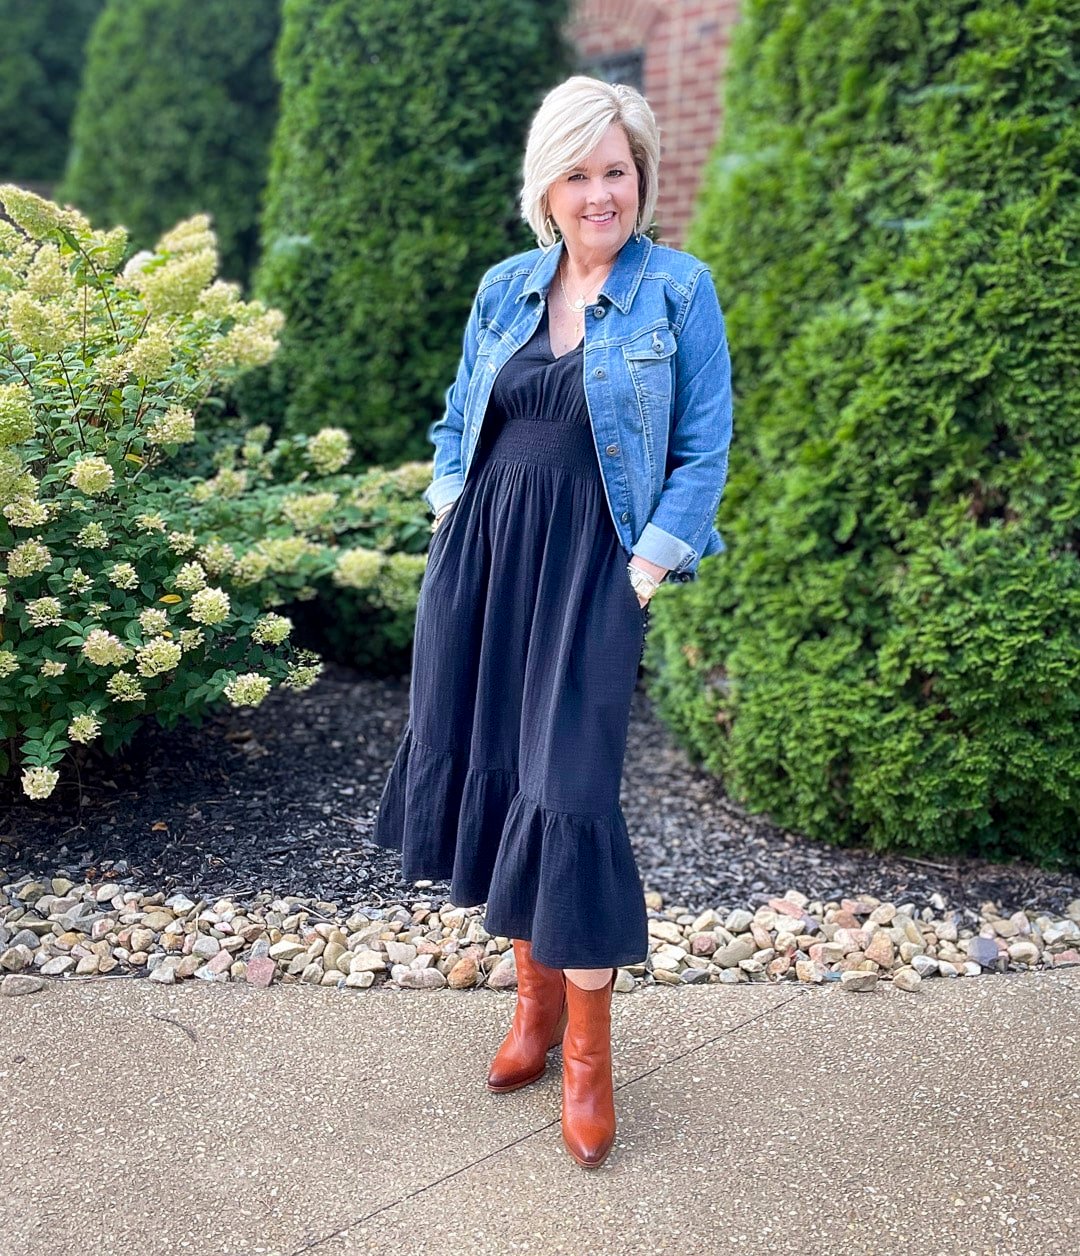 Over 40 Fashion Blogger, Tania Stephens is styling Old Navy Fall Dresses with western boots34